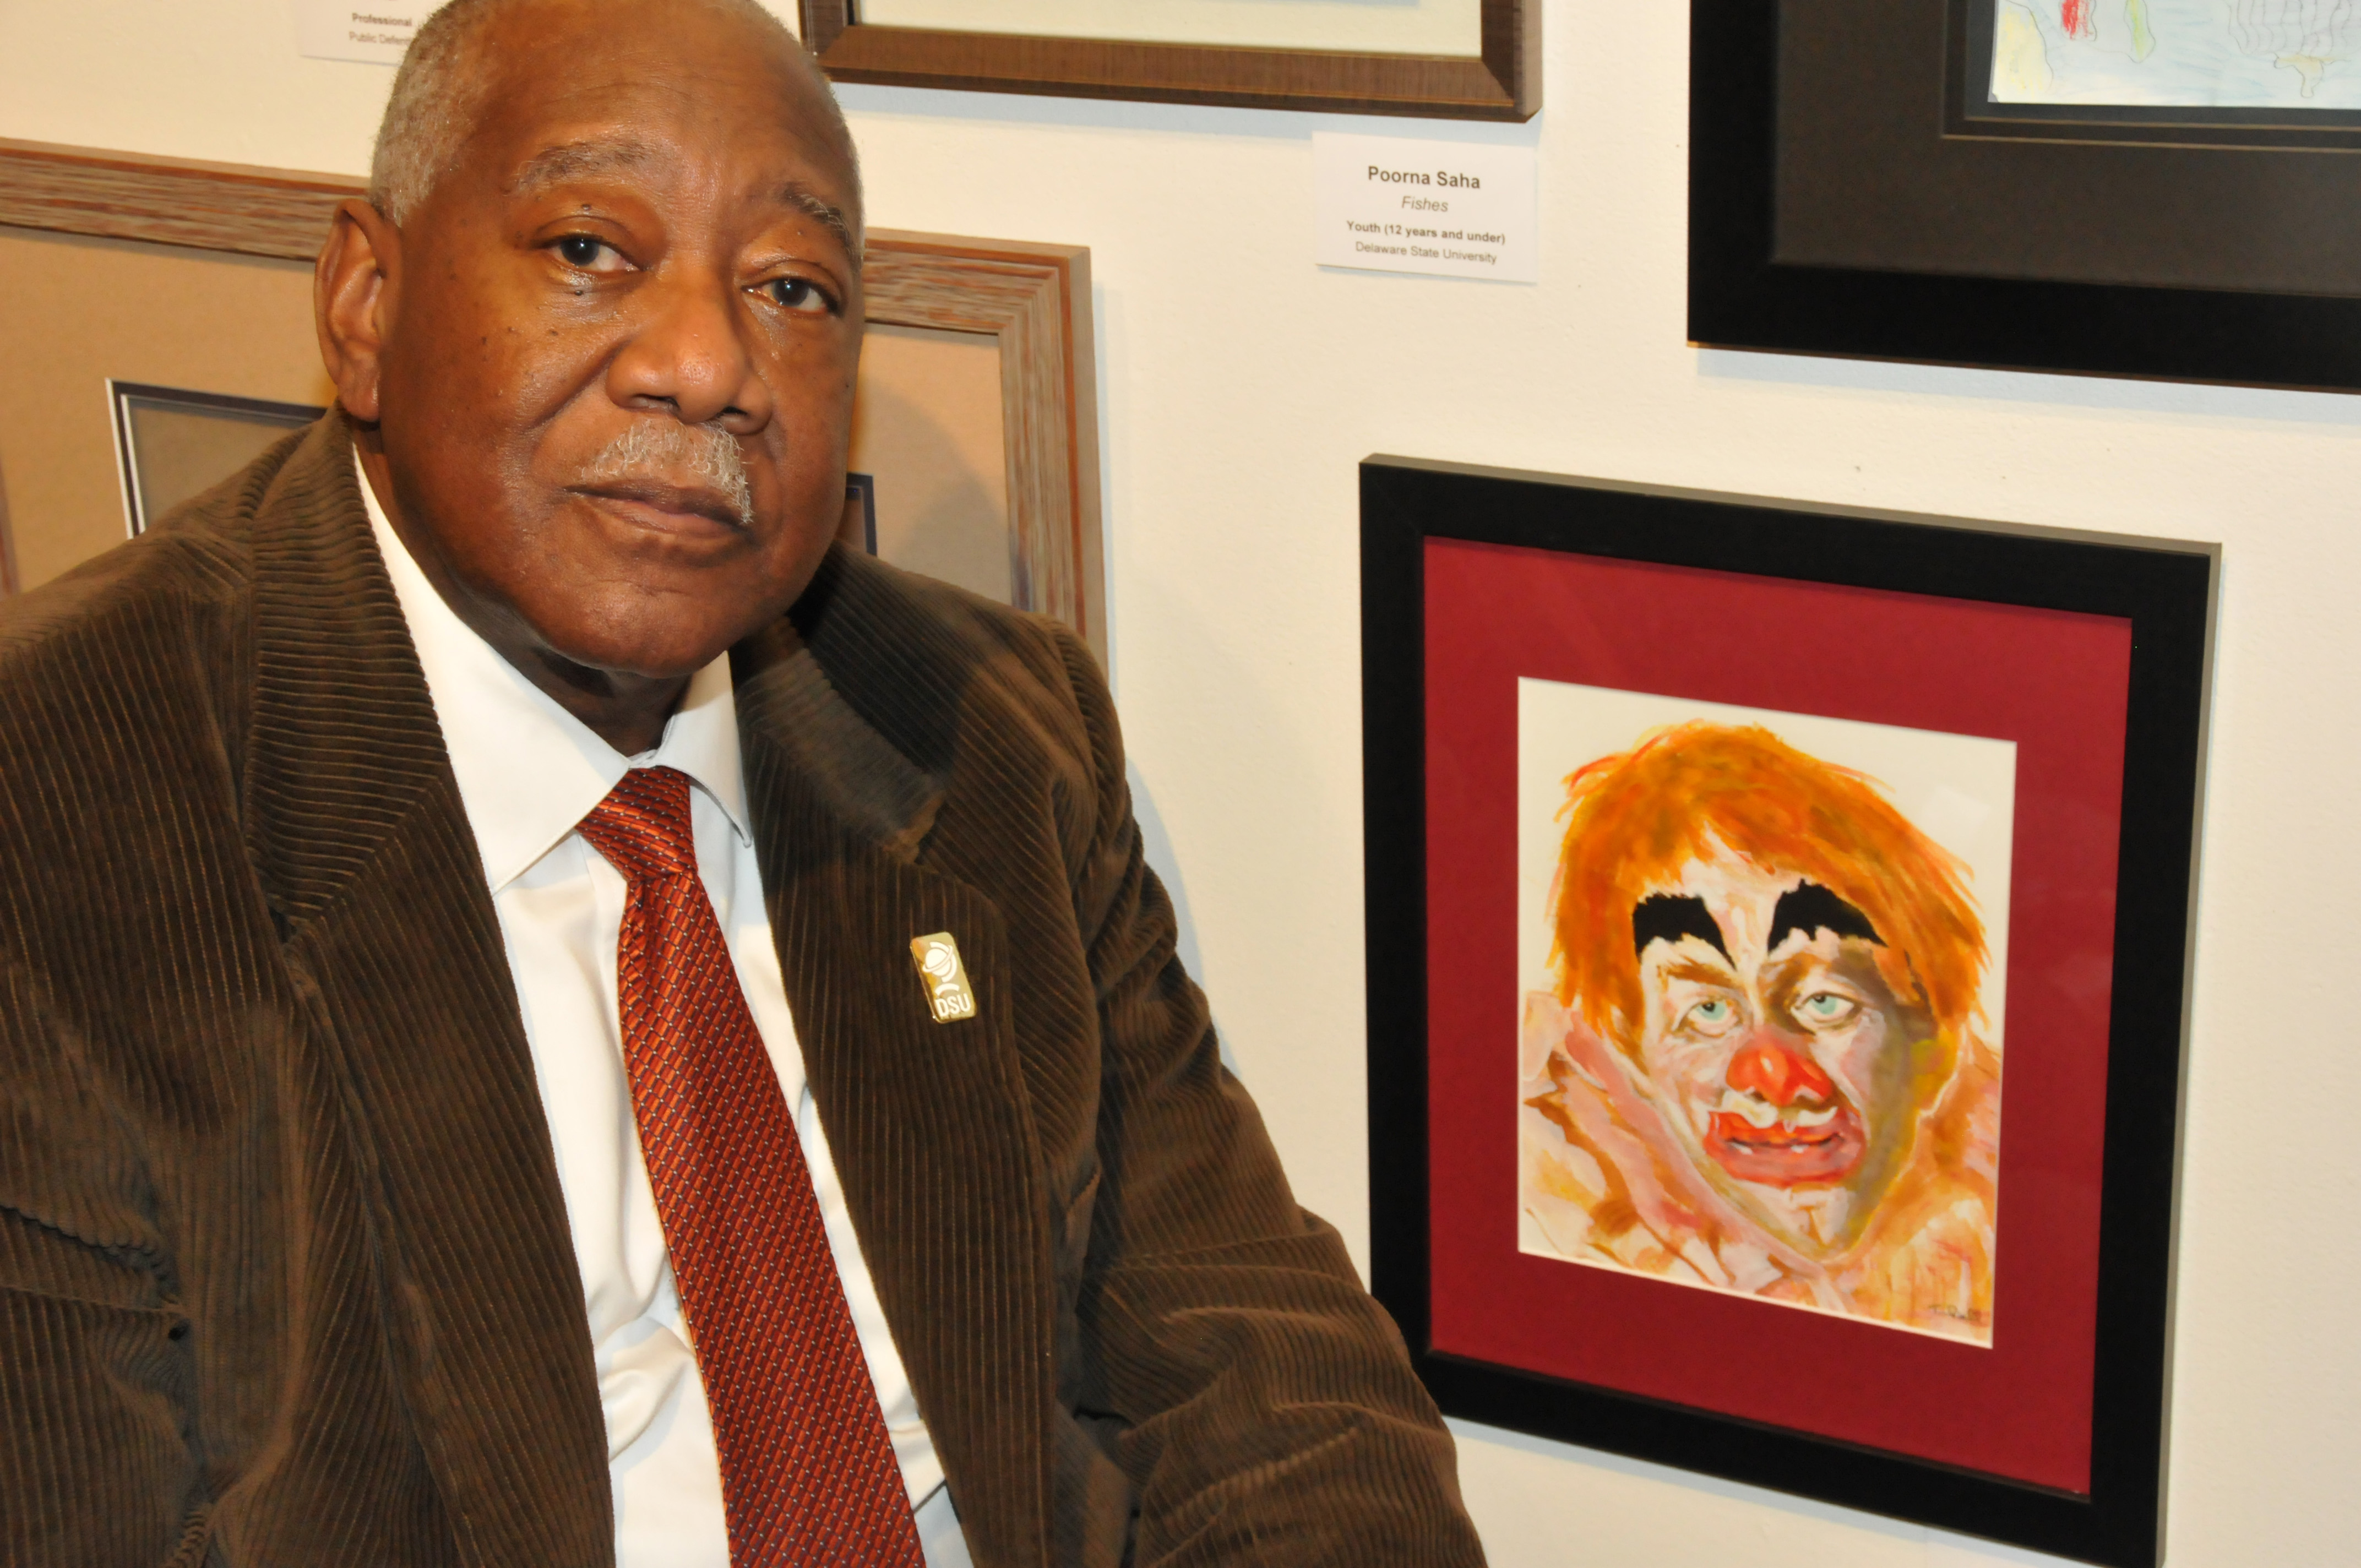 Bryant T. Bell with his artwork entitled "Barnum and Bailey Circus," one of the more than 200 works on display in the State Employee Exhibition in the Arts Center/Gallery on campus.